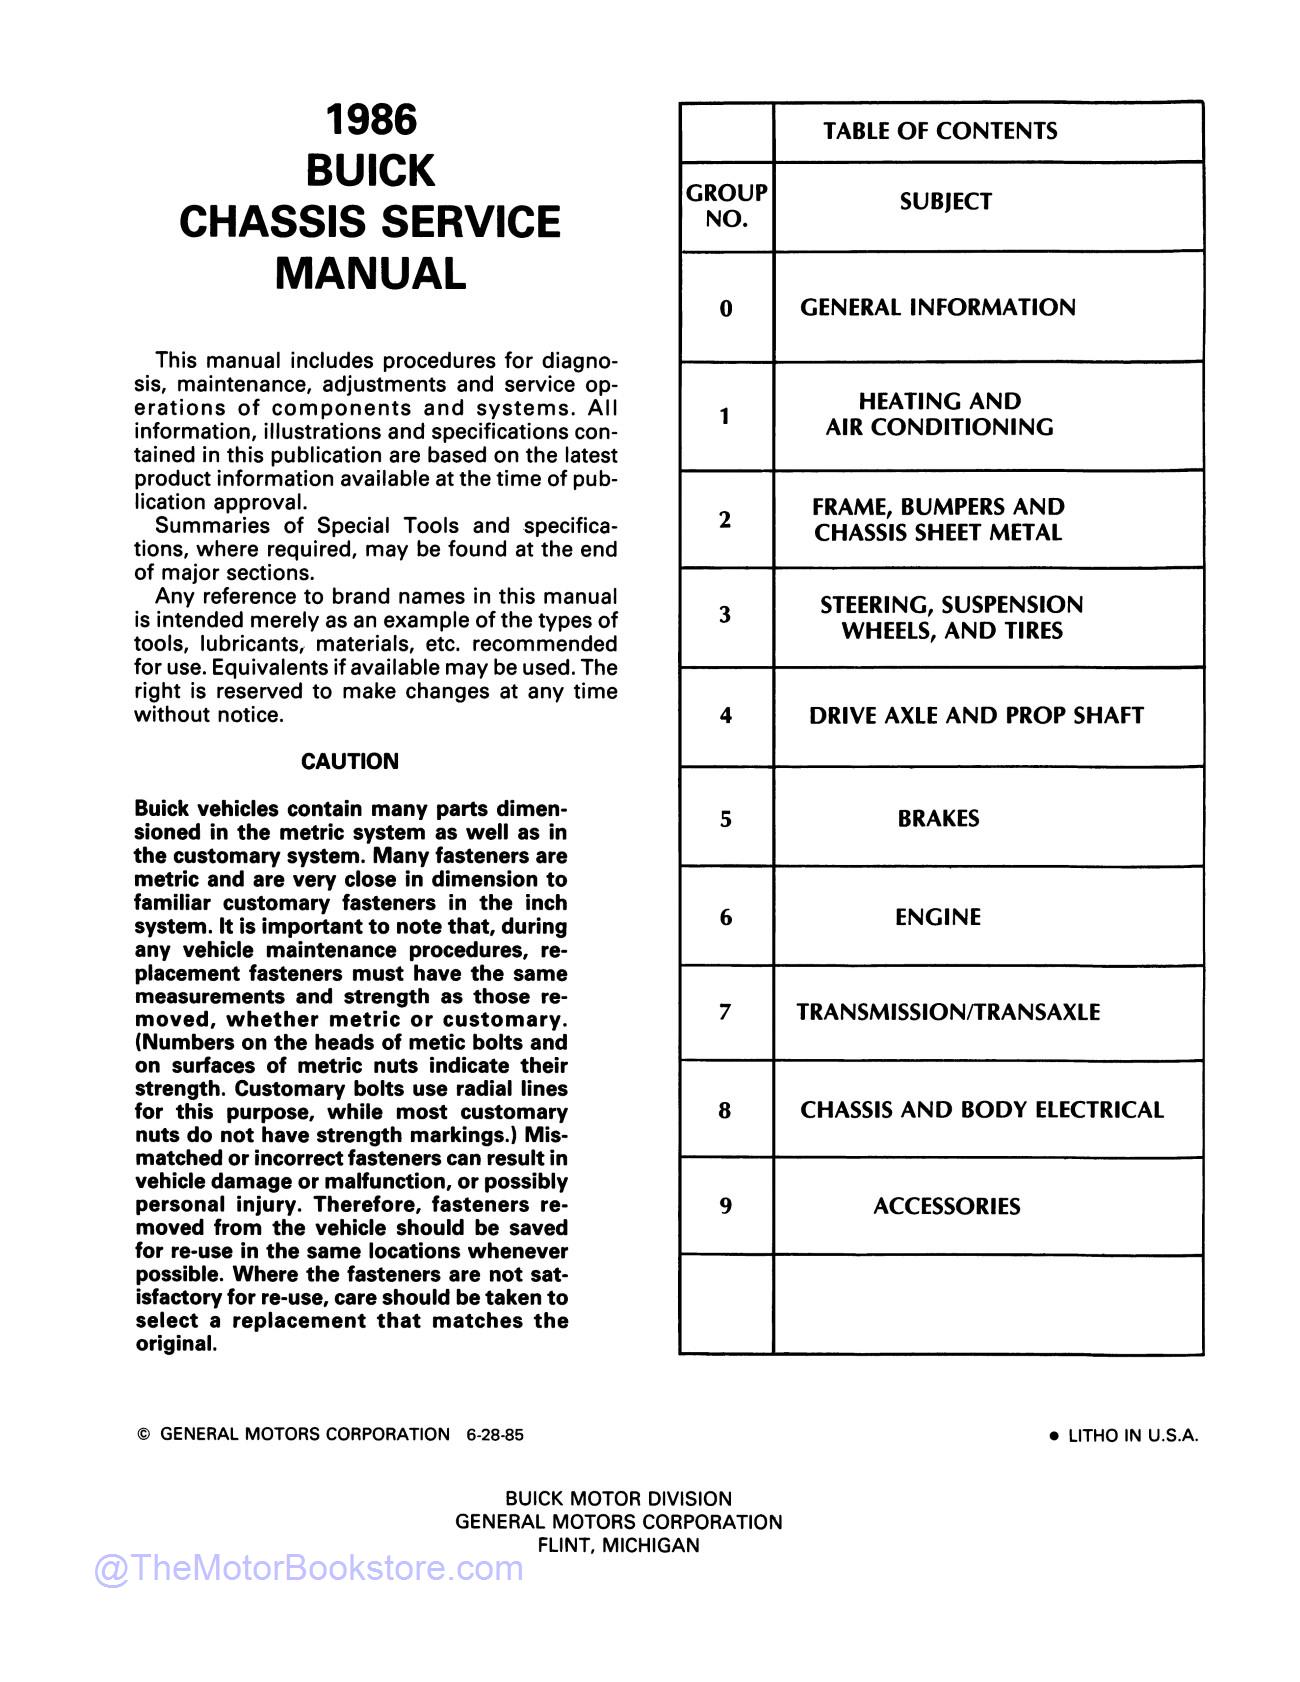 1986 Buick and Grand National Service Manual  - Table of Contents